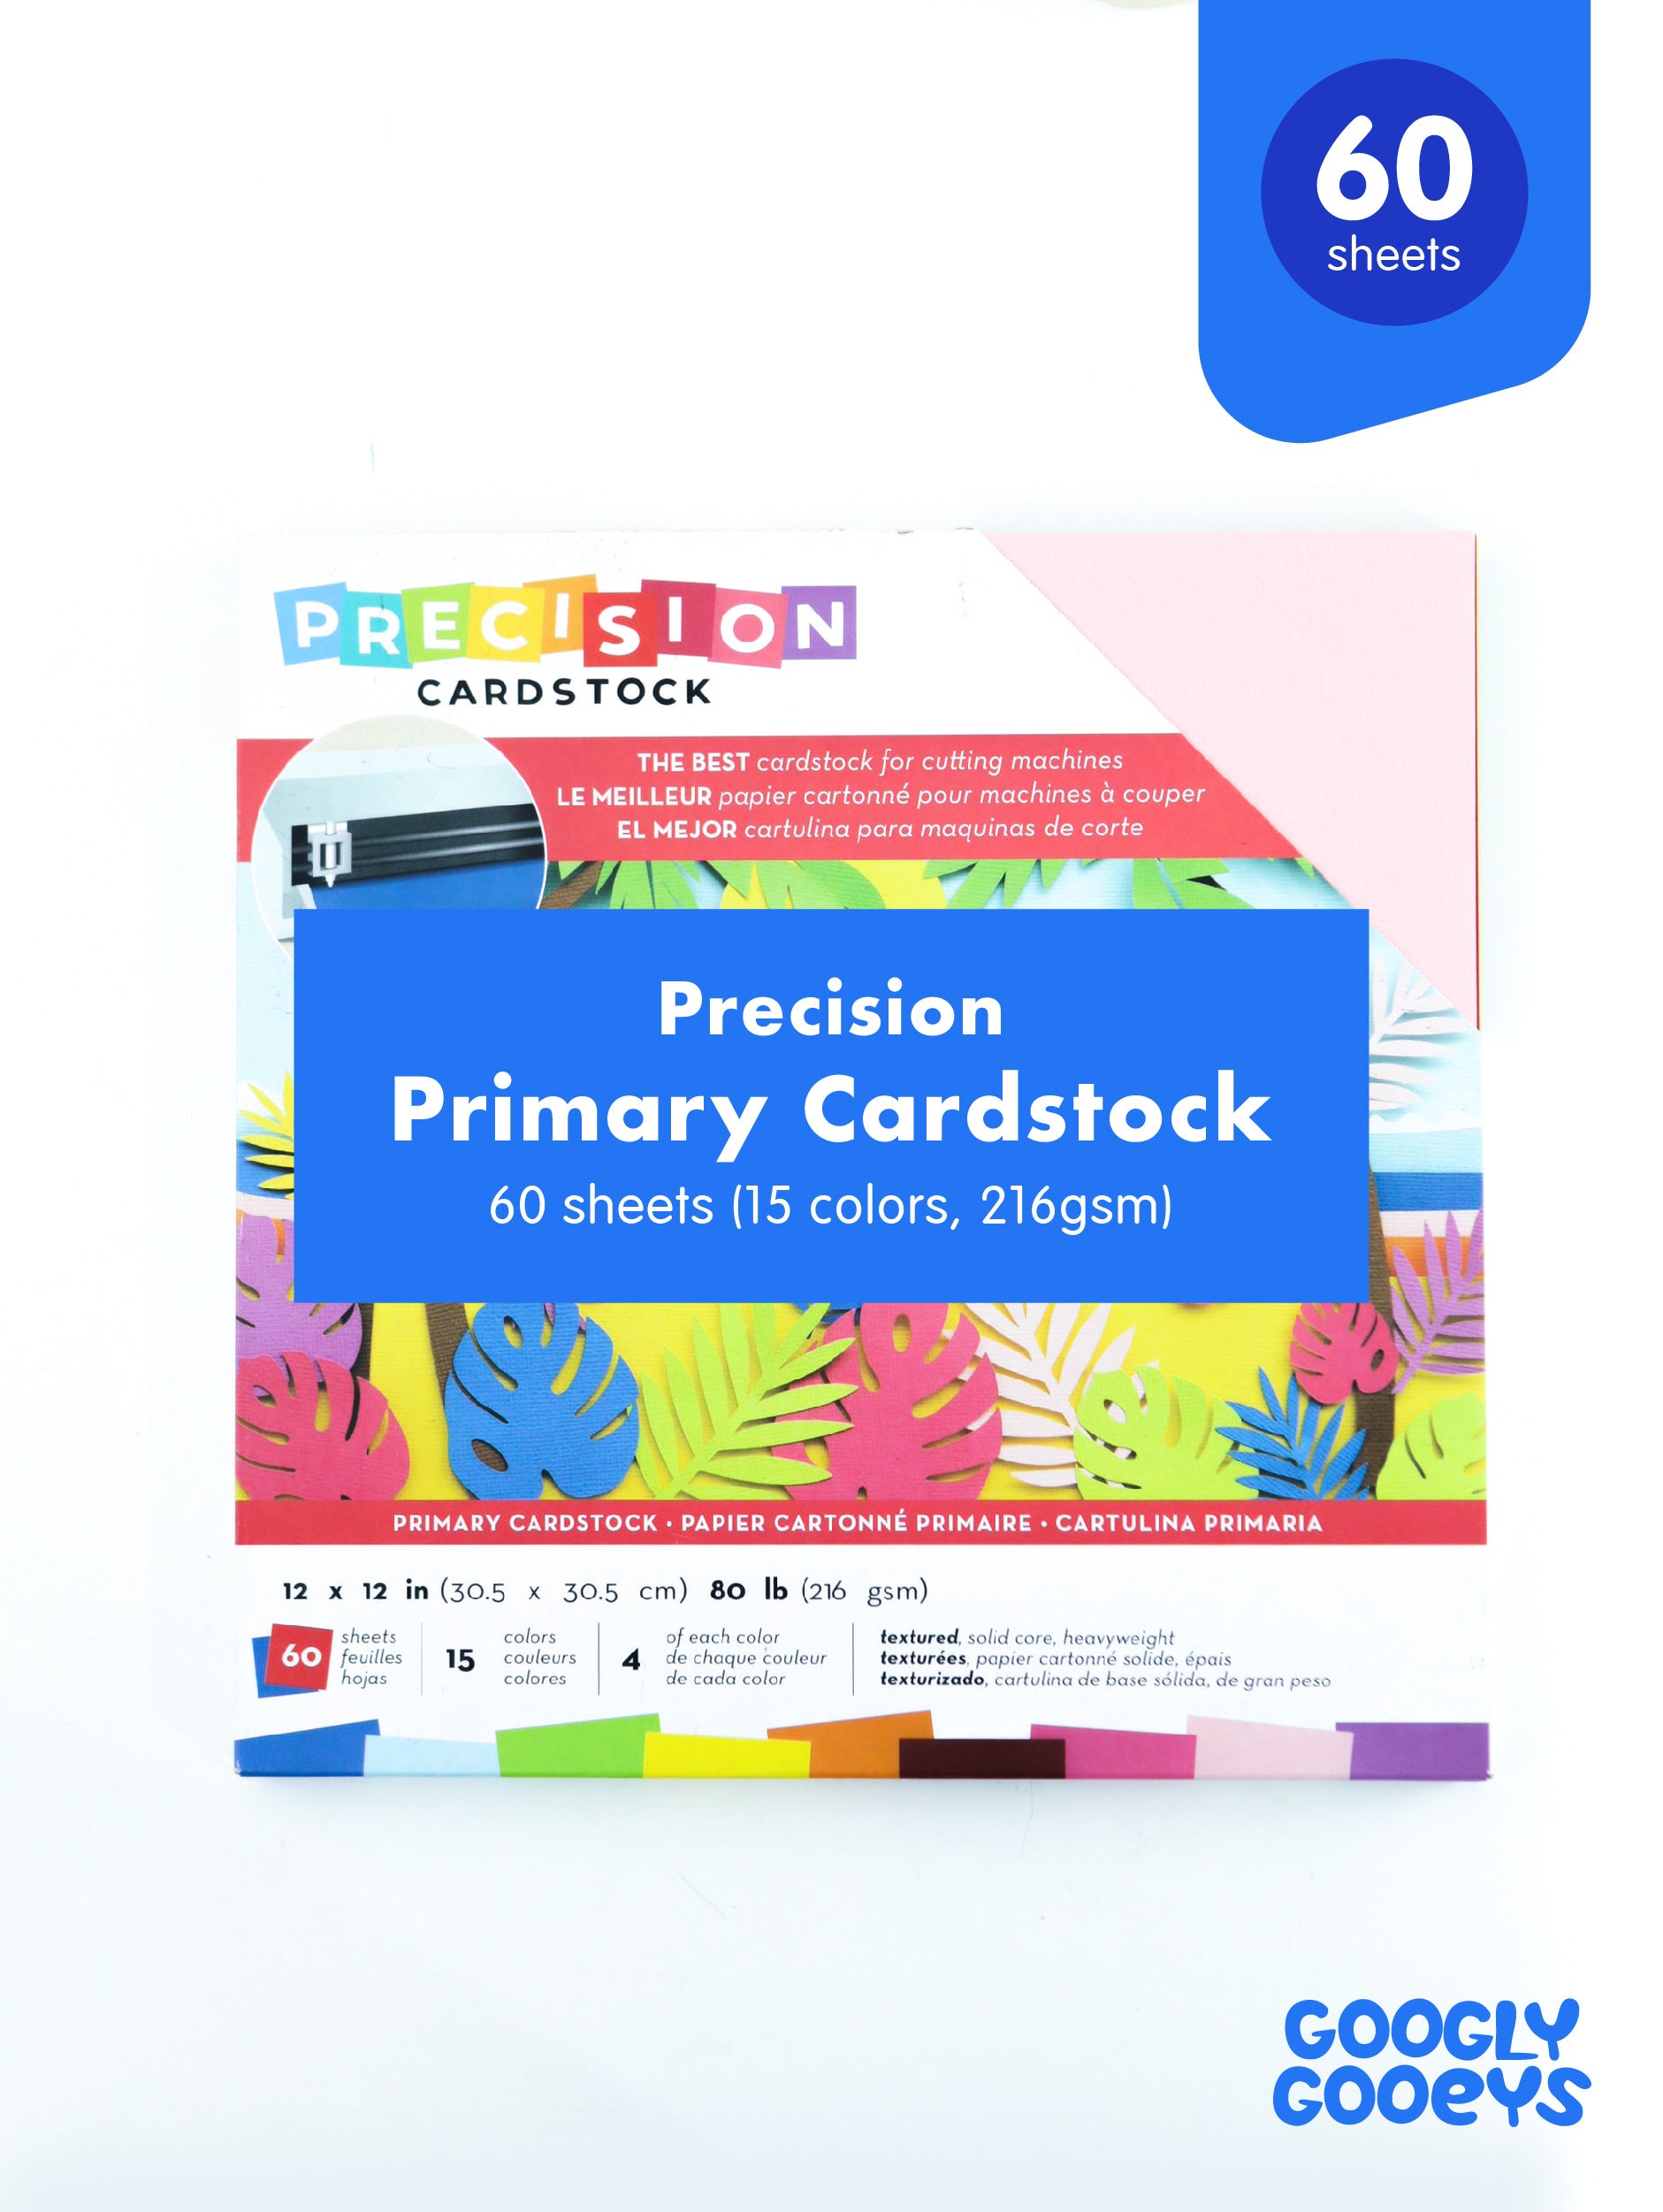 Precision Cardstock Primary 12x12 inches (60 sheets, 216gsm)